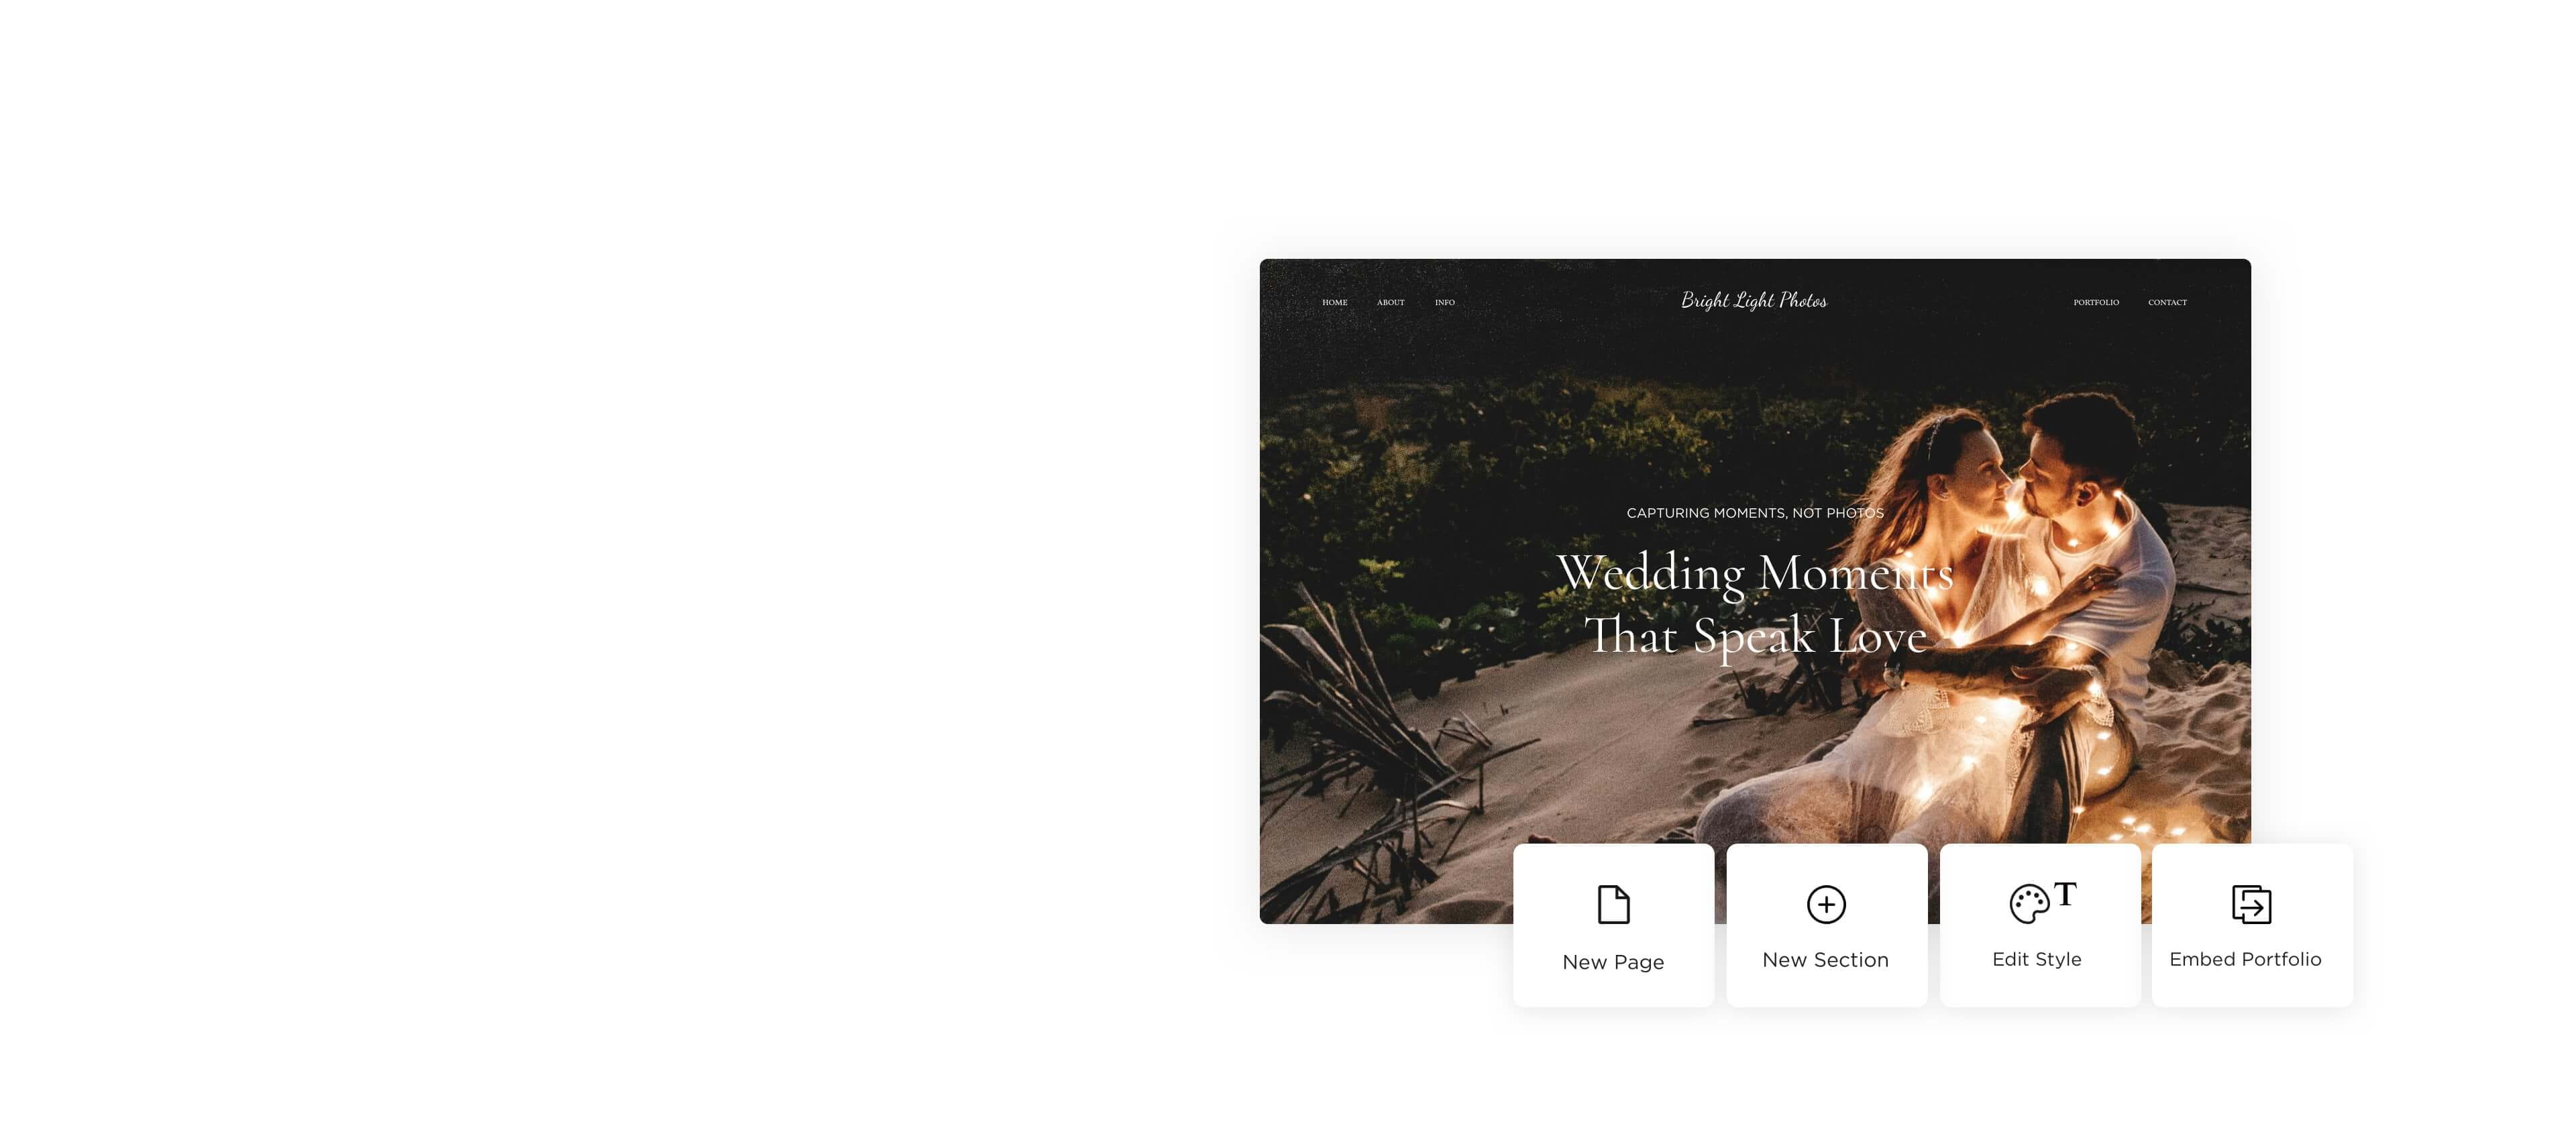 graphic showing a wedding photography website hero with adding sections and embedding portfolio features shown on interface